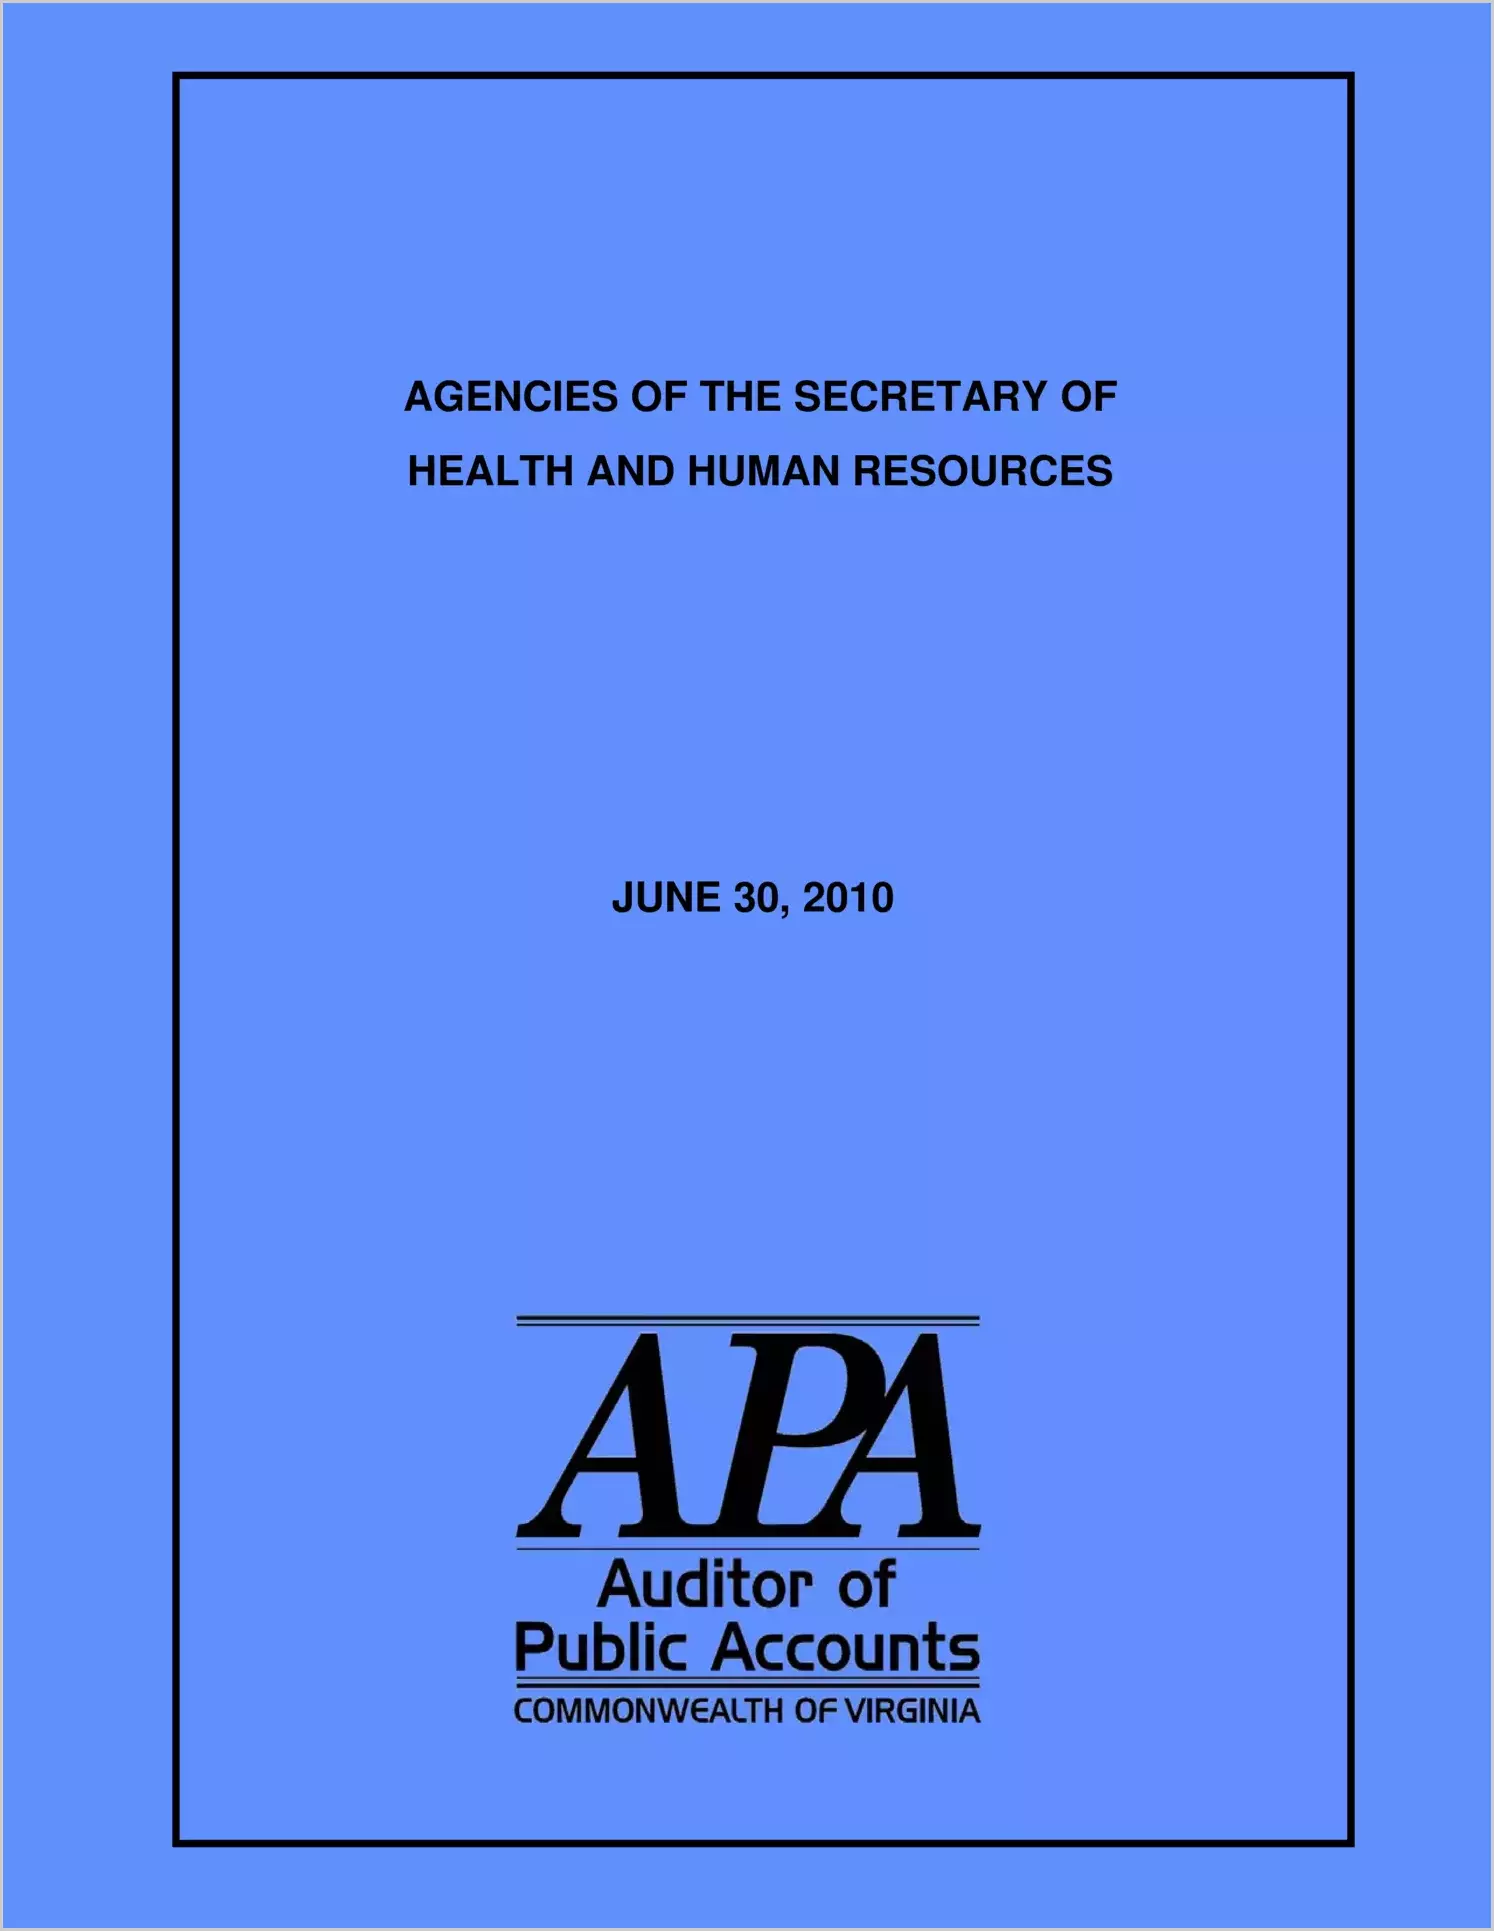 Agencies of the Secretary of Health and Human Resources - June 30, 2010